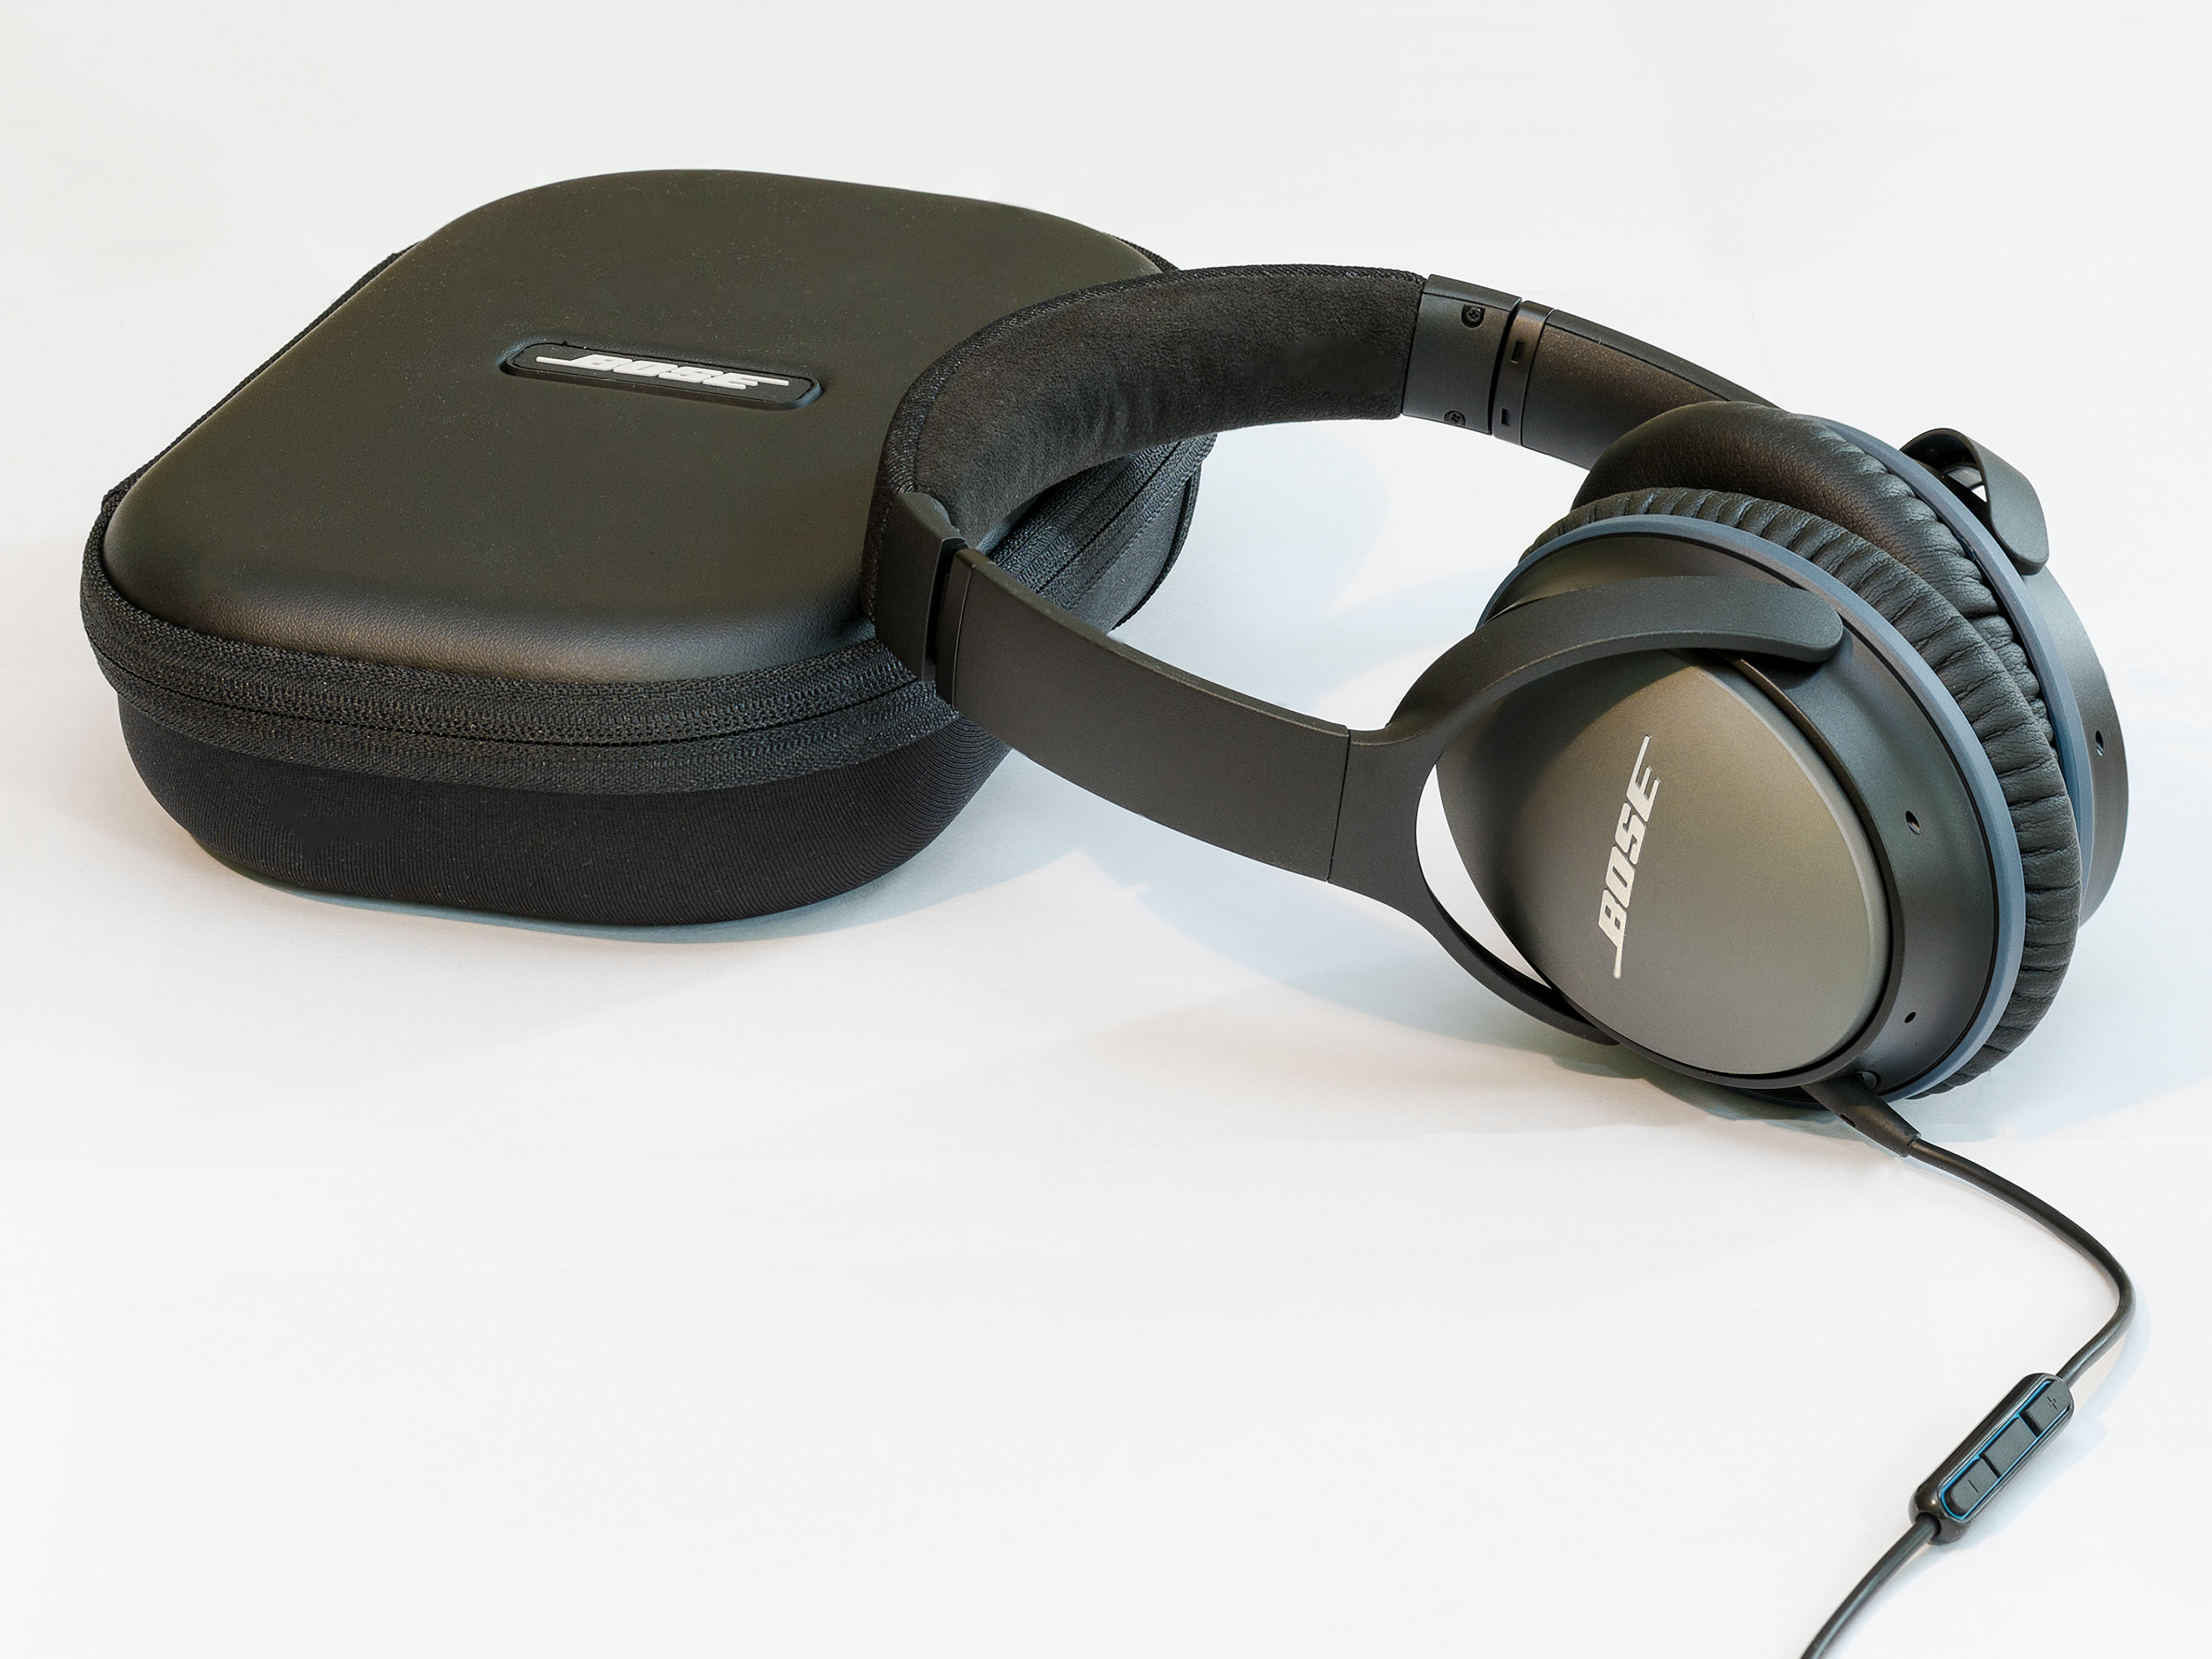 Bose QuietComfort 25 Acoustic Noise Cancelling Headphones with Carry Case